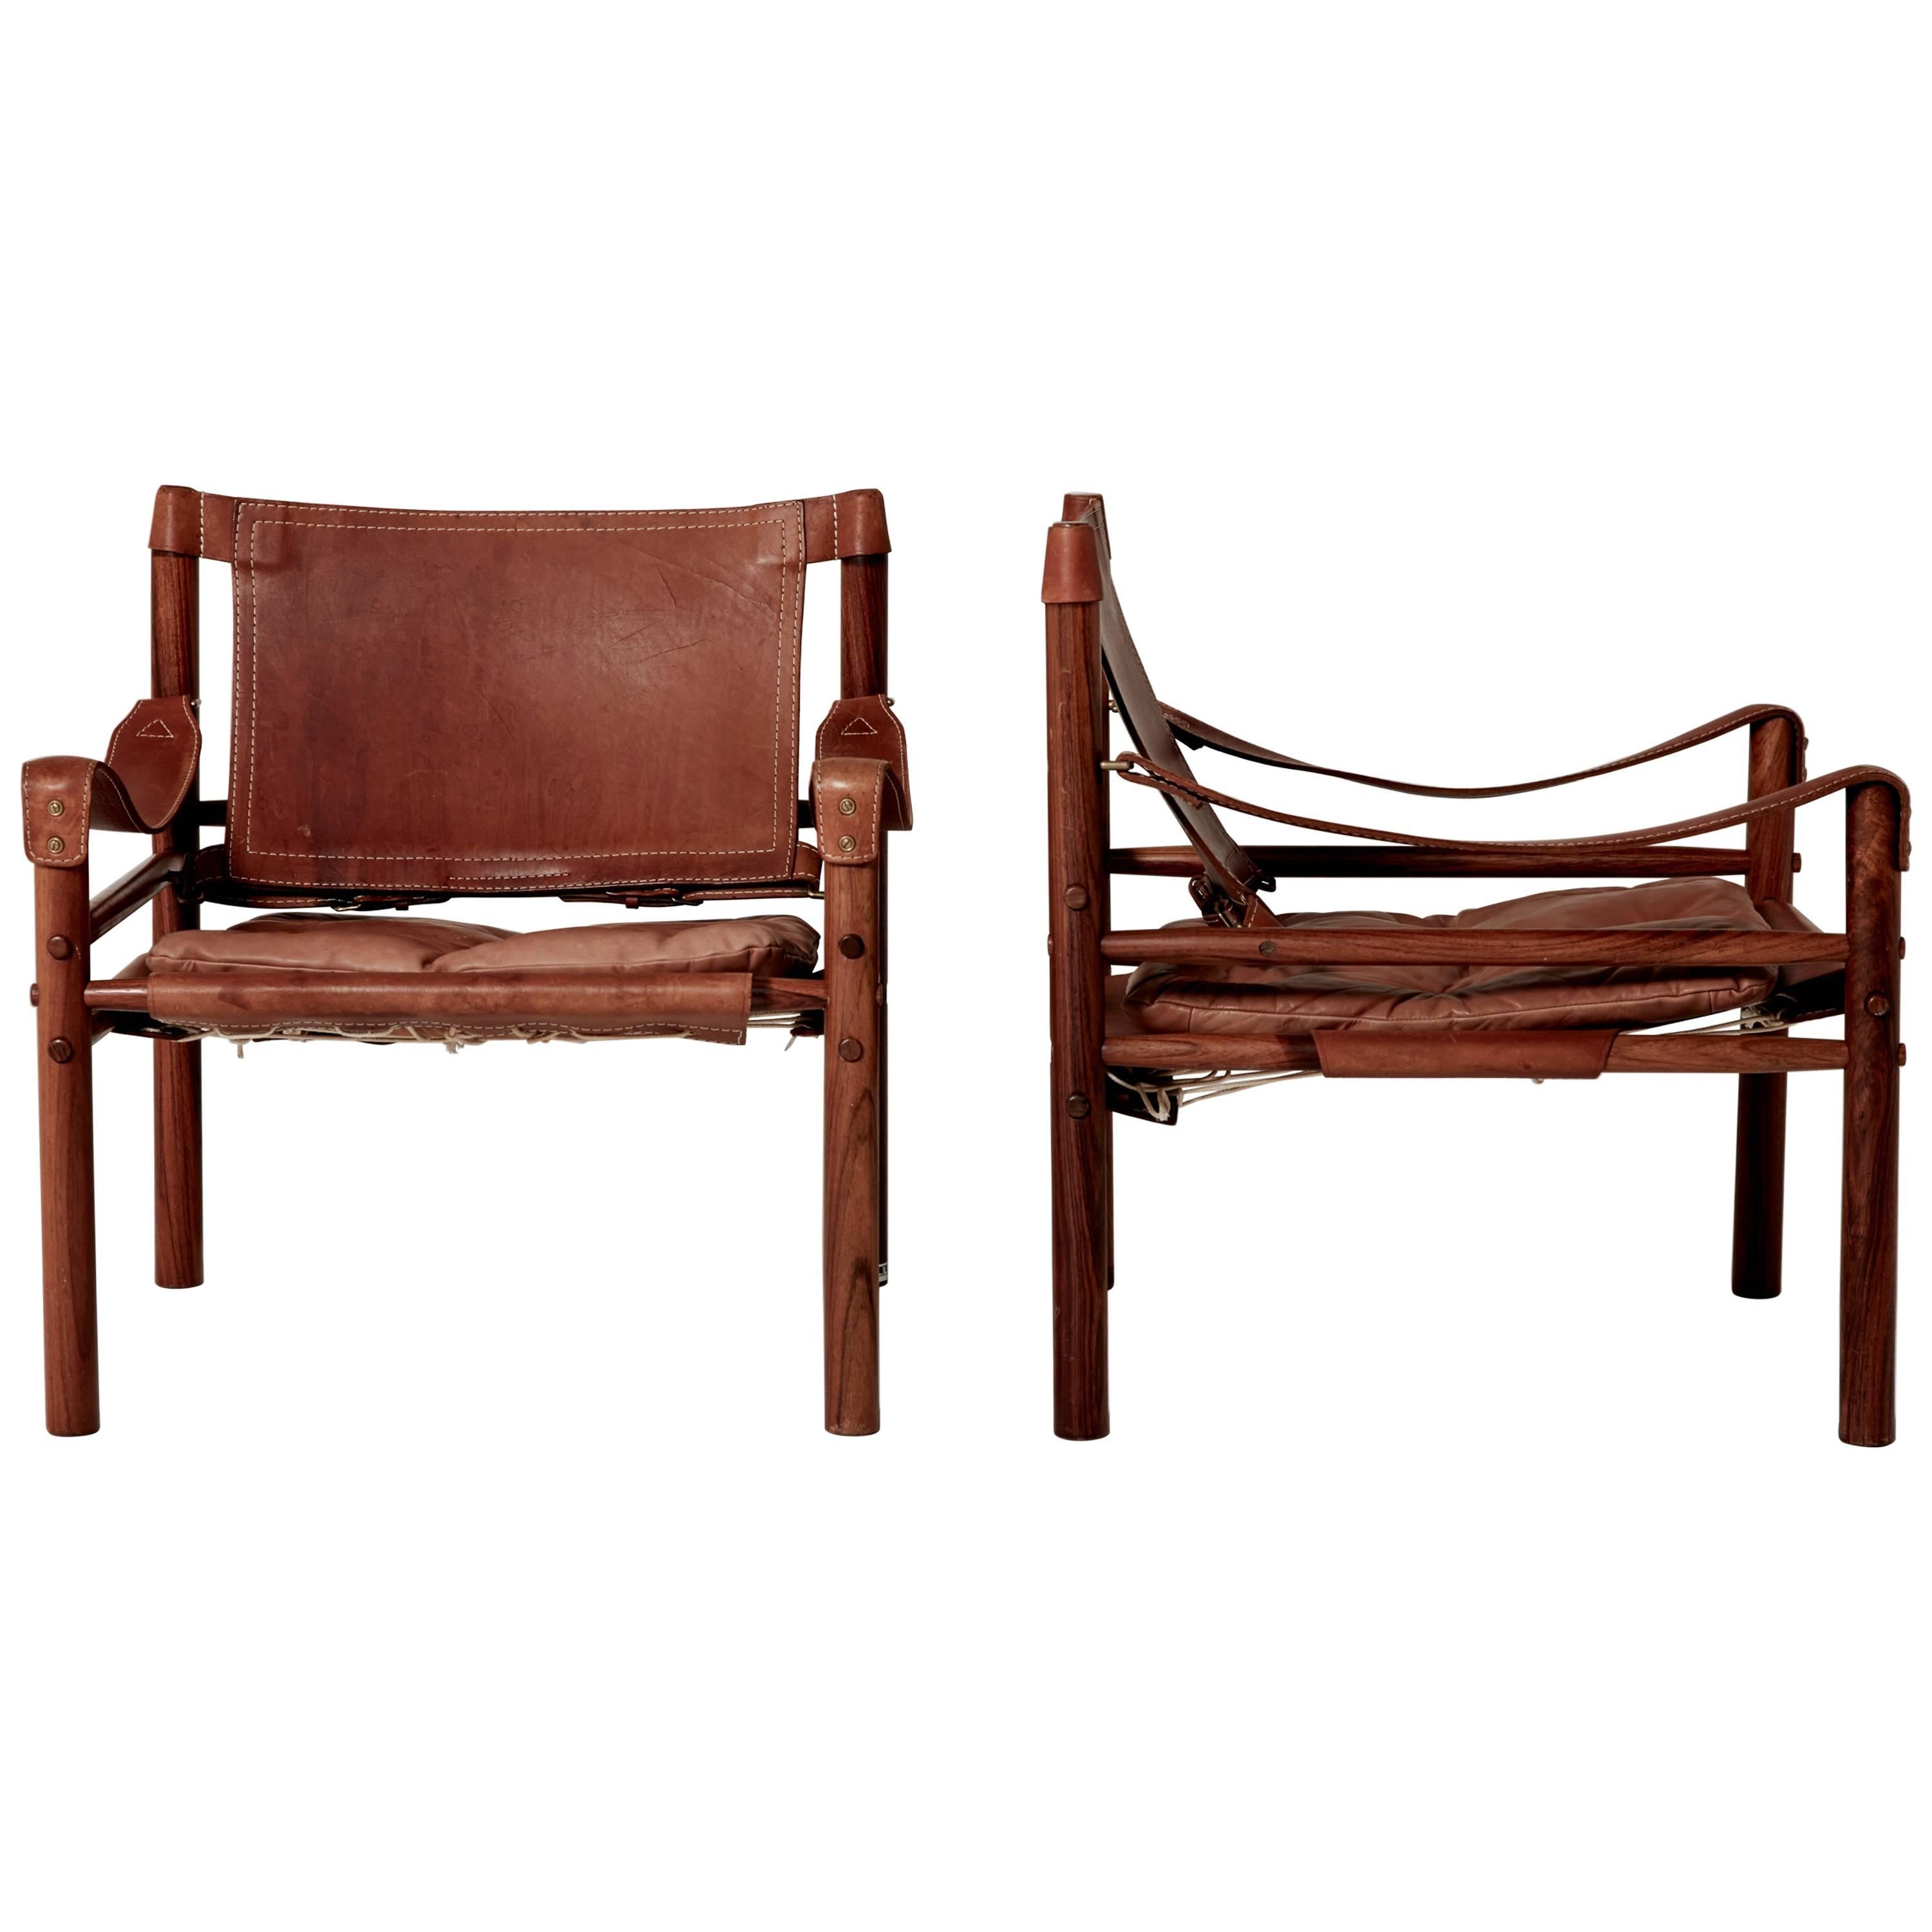 Pair of Arne Norell Safari 'Sirocco' Chairs, Sweden, 1960s